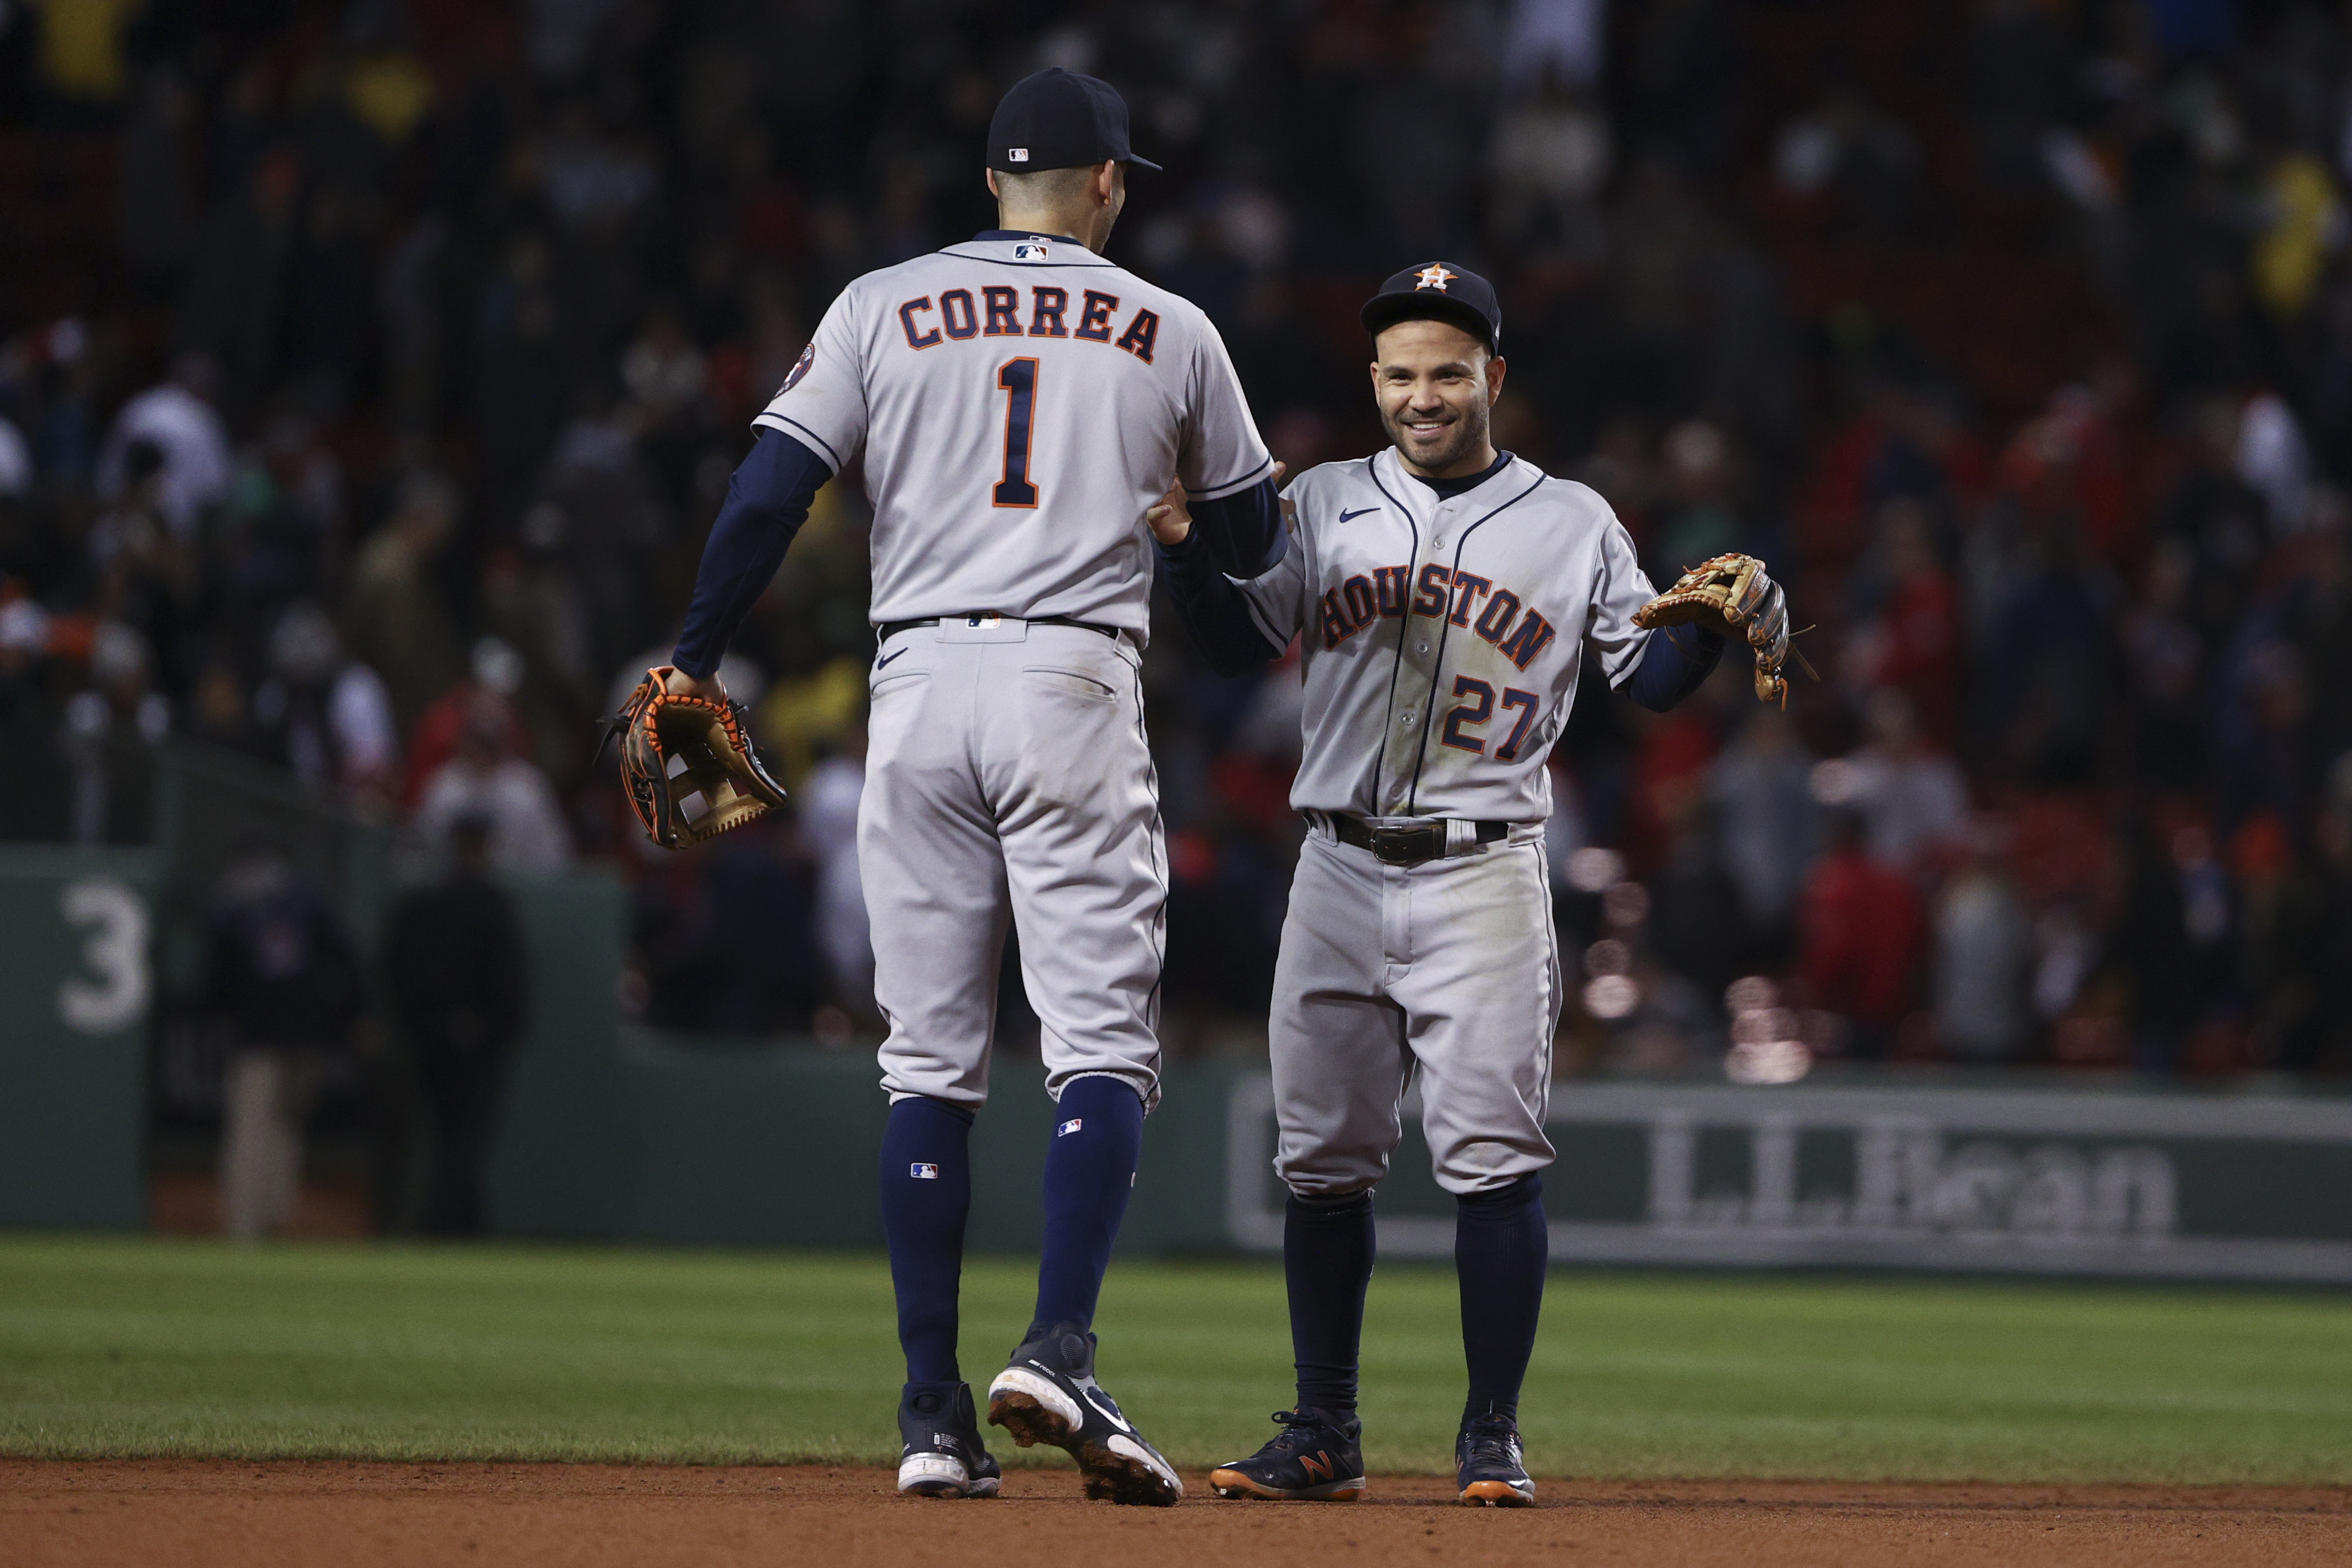 Astros' Altuve 'surprised' by Correa's signing with Twins - NBC Sports